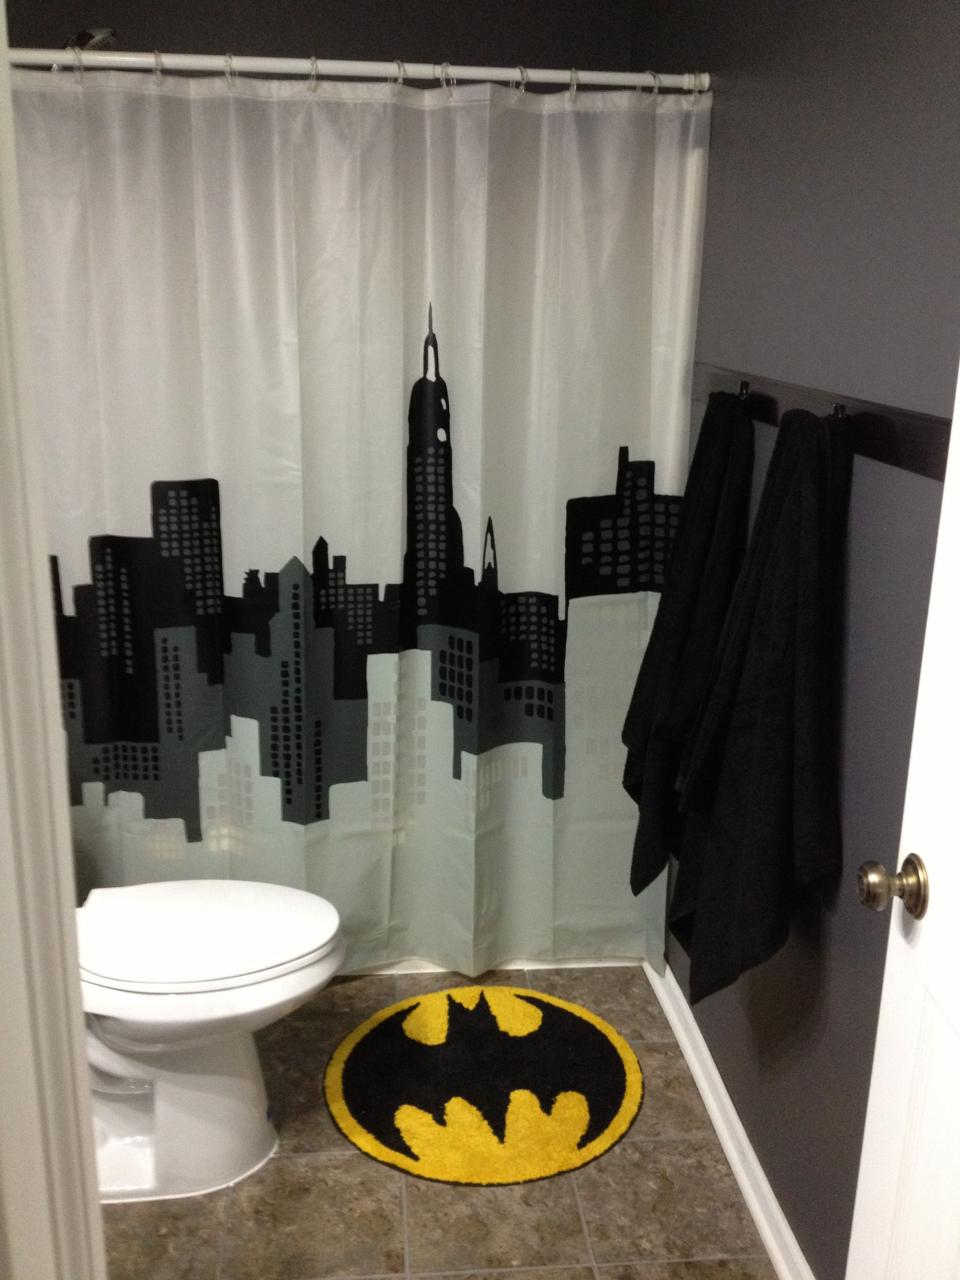 Batman bathroom that can be easily changed when the boys get older